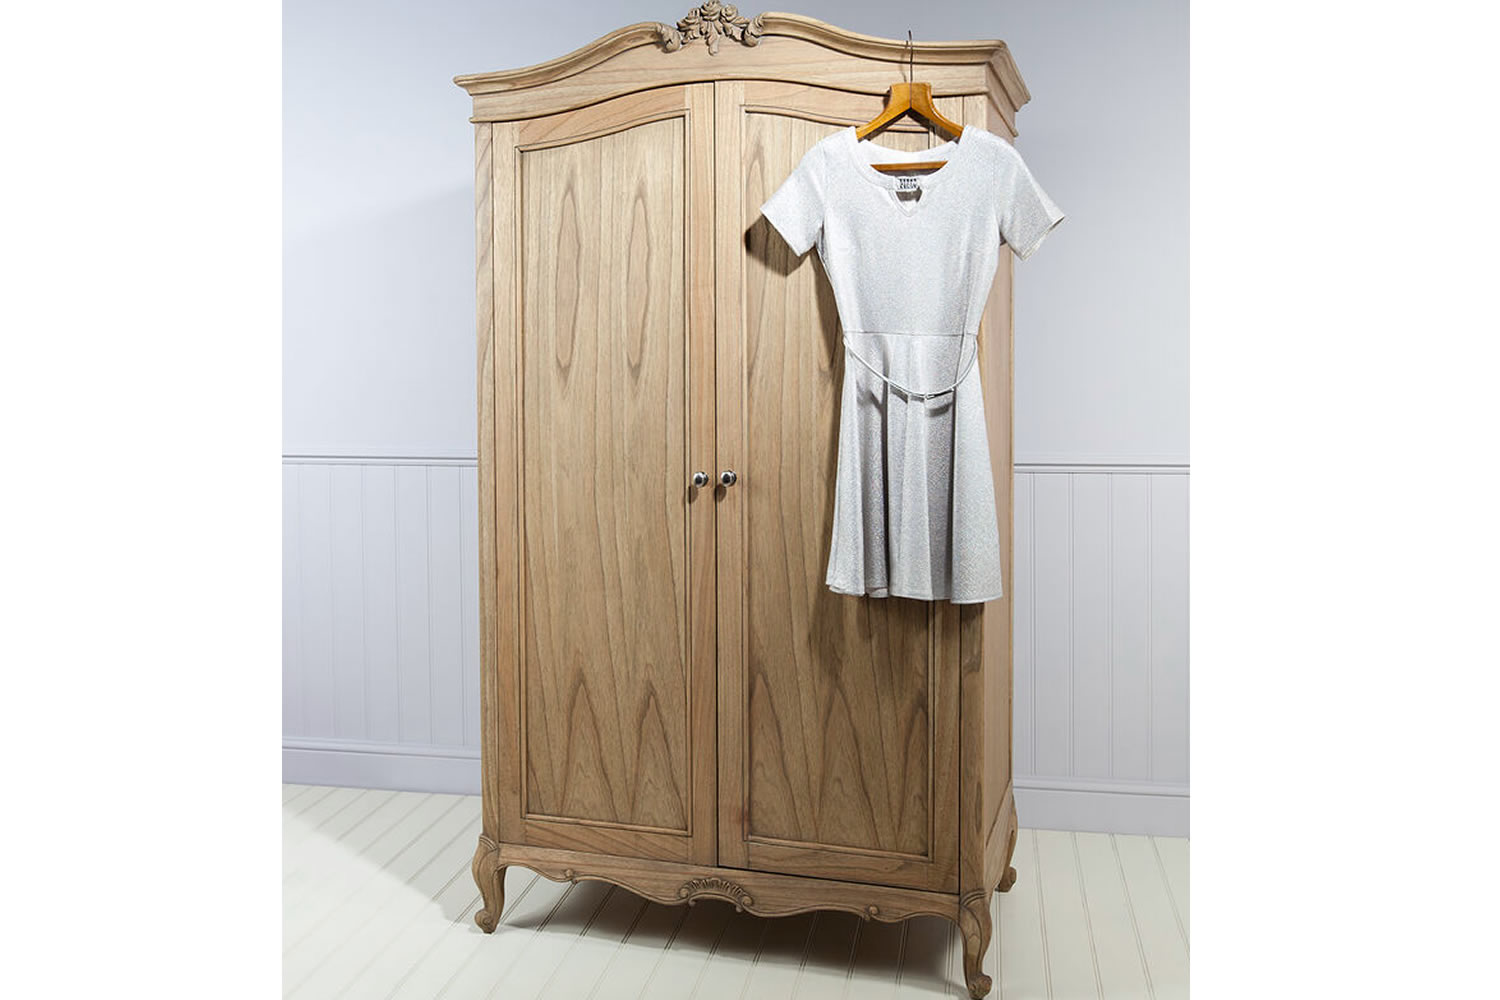 View Chic 2 Door Wooden Bedroom Wardrobe With Hanging Rail Weathered Finish Crafted From Mindi Ash Veneered MDF Traditional French Furniture Design information